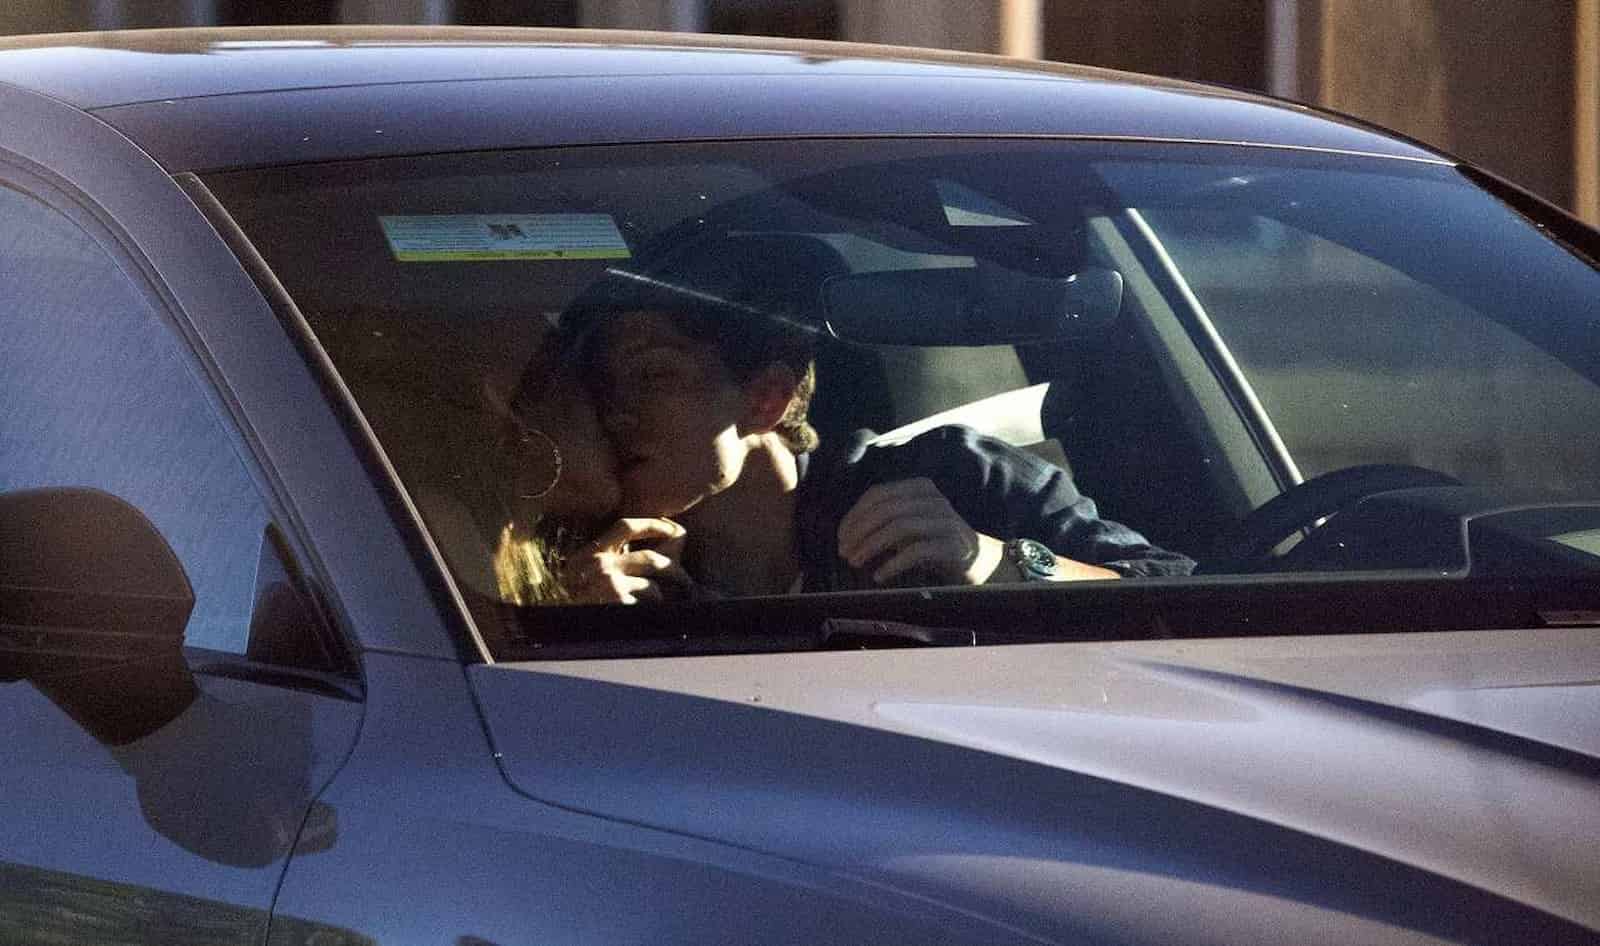 Tom Holland and Zendaya kissing at red light